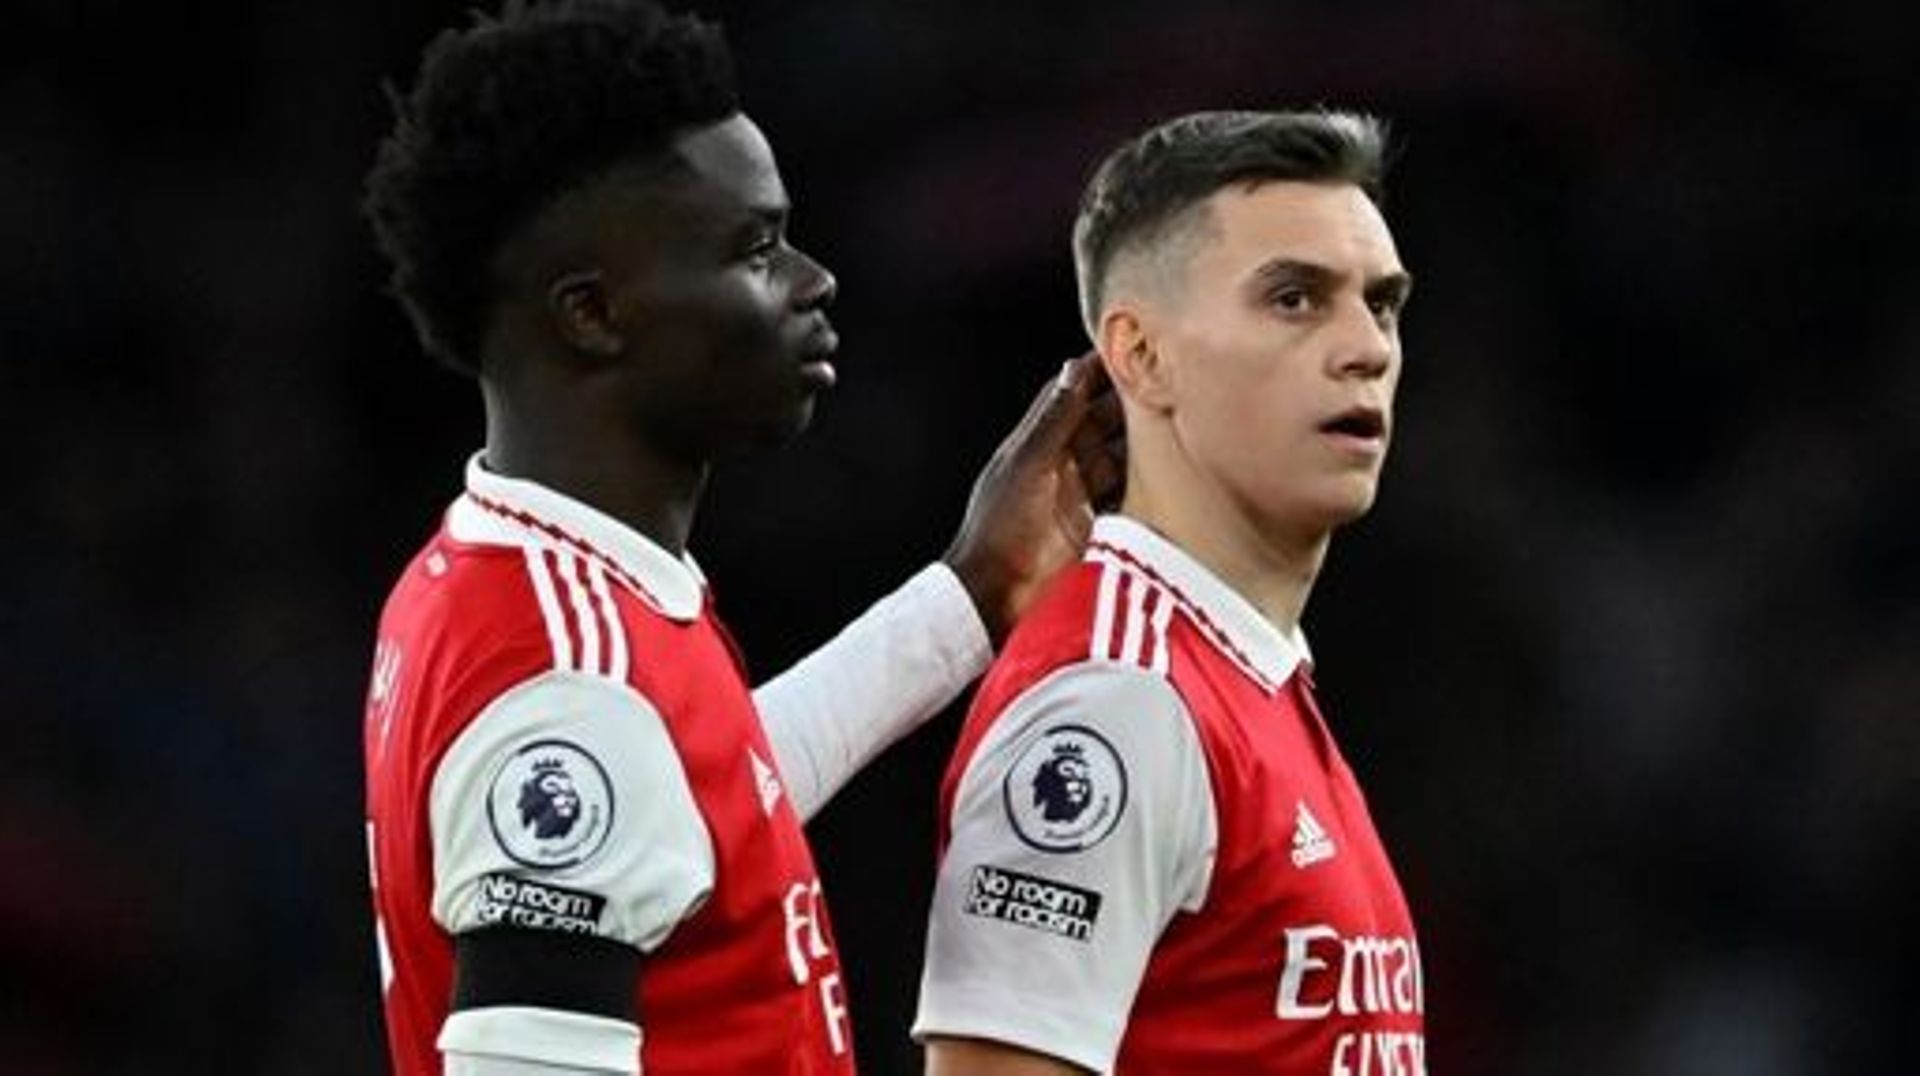 Arsenal’s English midfielder Bukayo Saka (L) and Arsenal’s Belgian midfielder Leandro Trossard react after the English Premier League football match between Arsenal and Brentford at the Emirates Stadium in London on February 11, 2023. JUSTIN TALLIS / AF